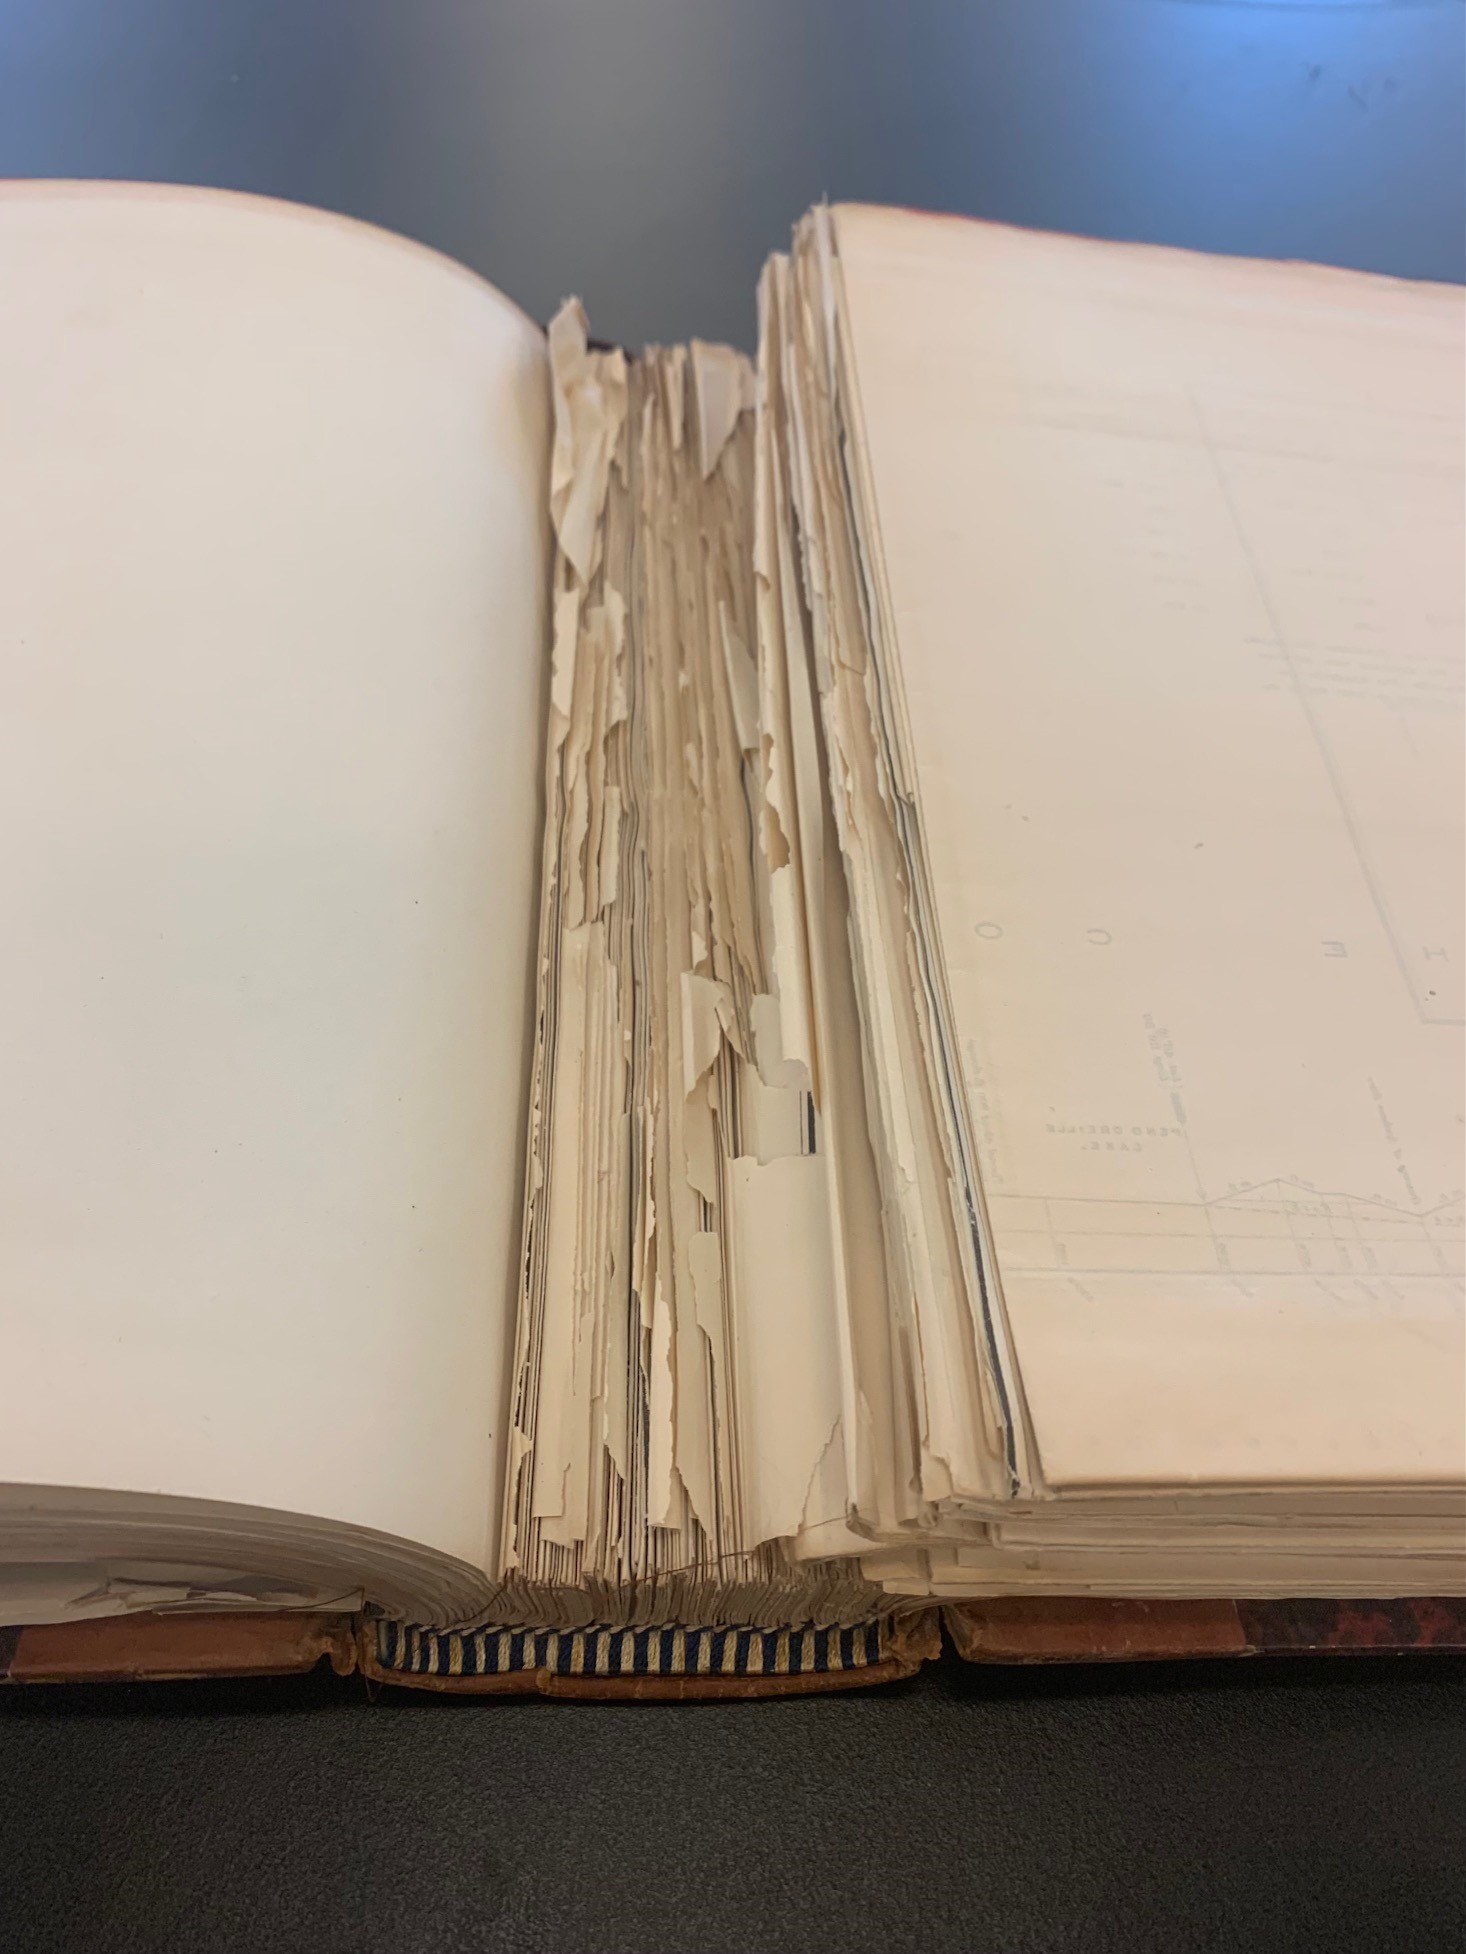 Bookbinding techniques